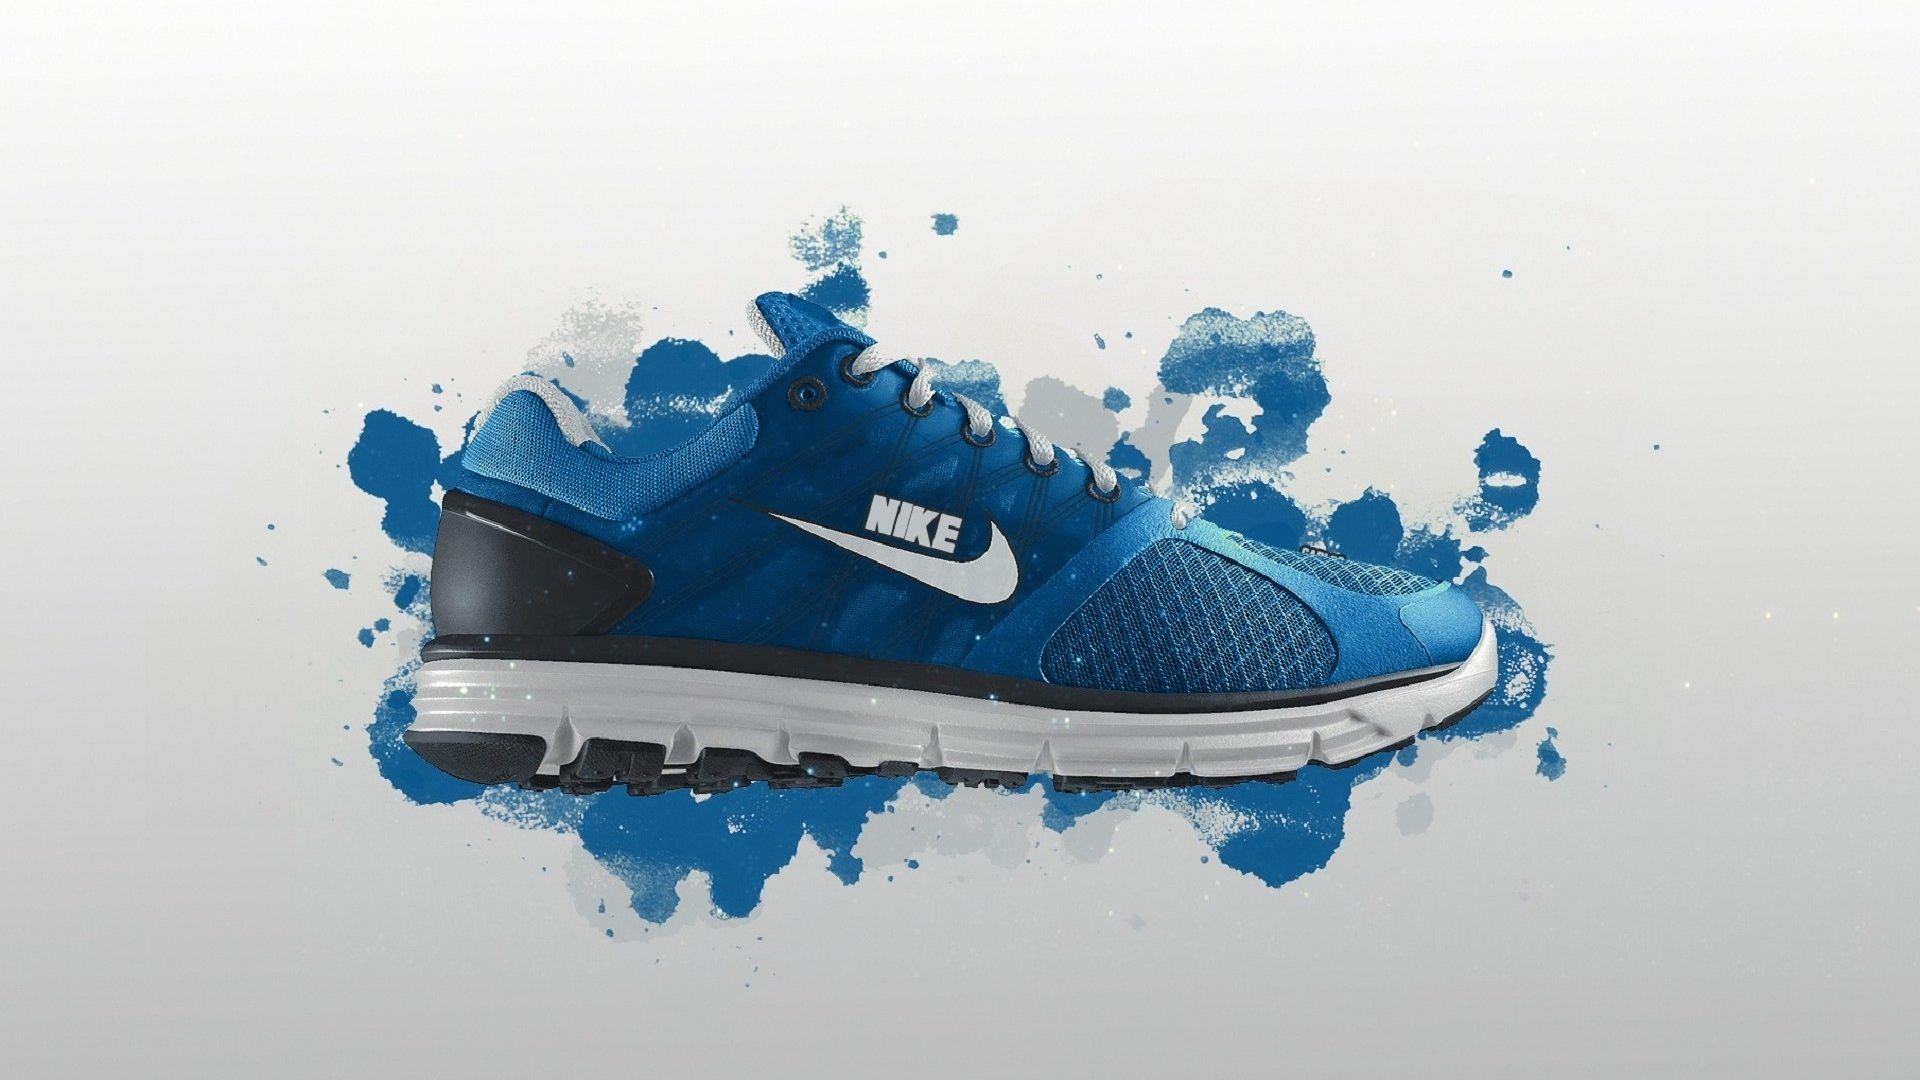 Download Wallpaper 1920x1080 nike, shoes, sneakers, blue, sports